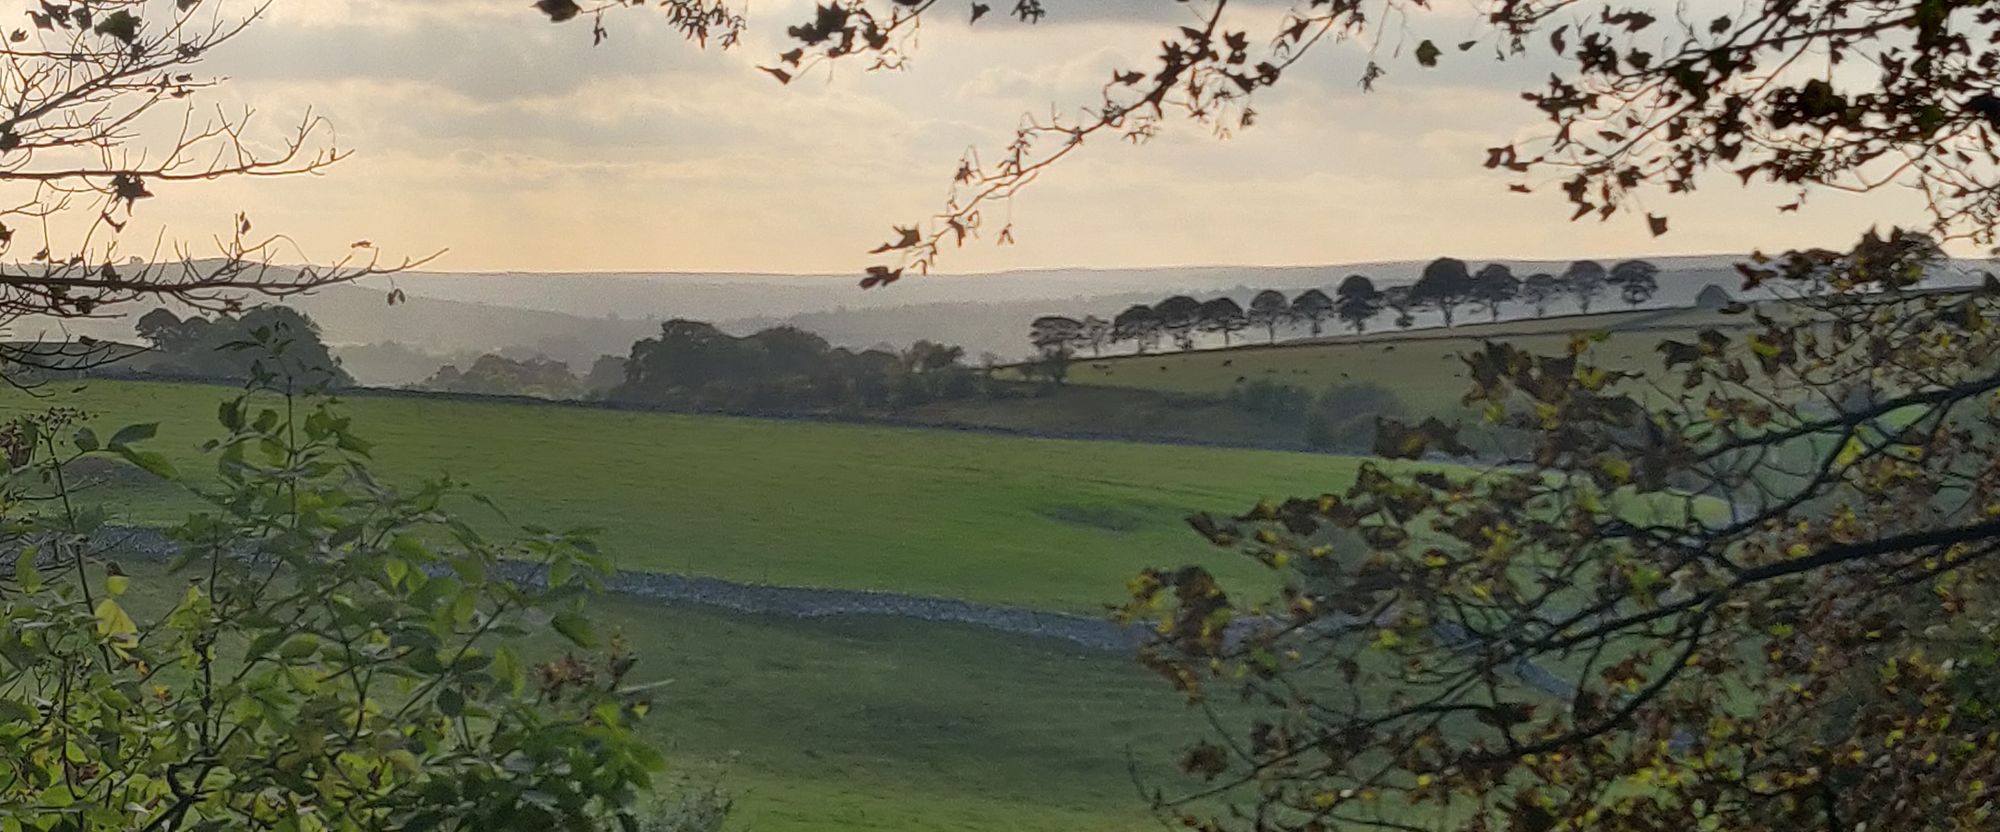 The hills and trees of the Derbyshire Dales